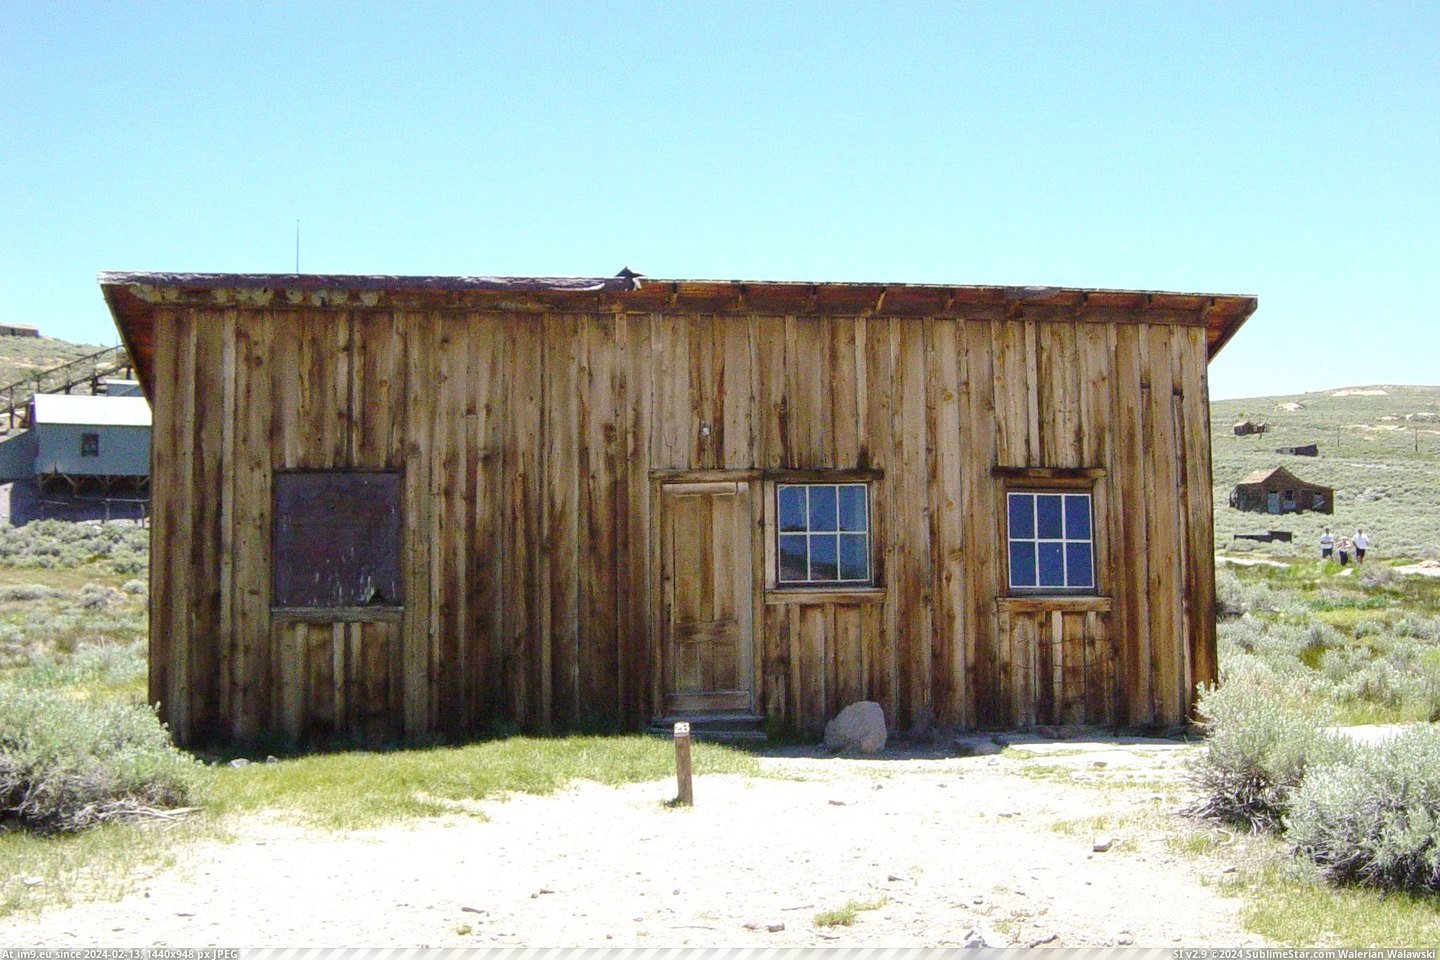 Site Of Masonic Hall In Bodie, California (in Bodie - a ghost town in Eastern California)